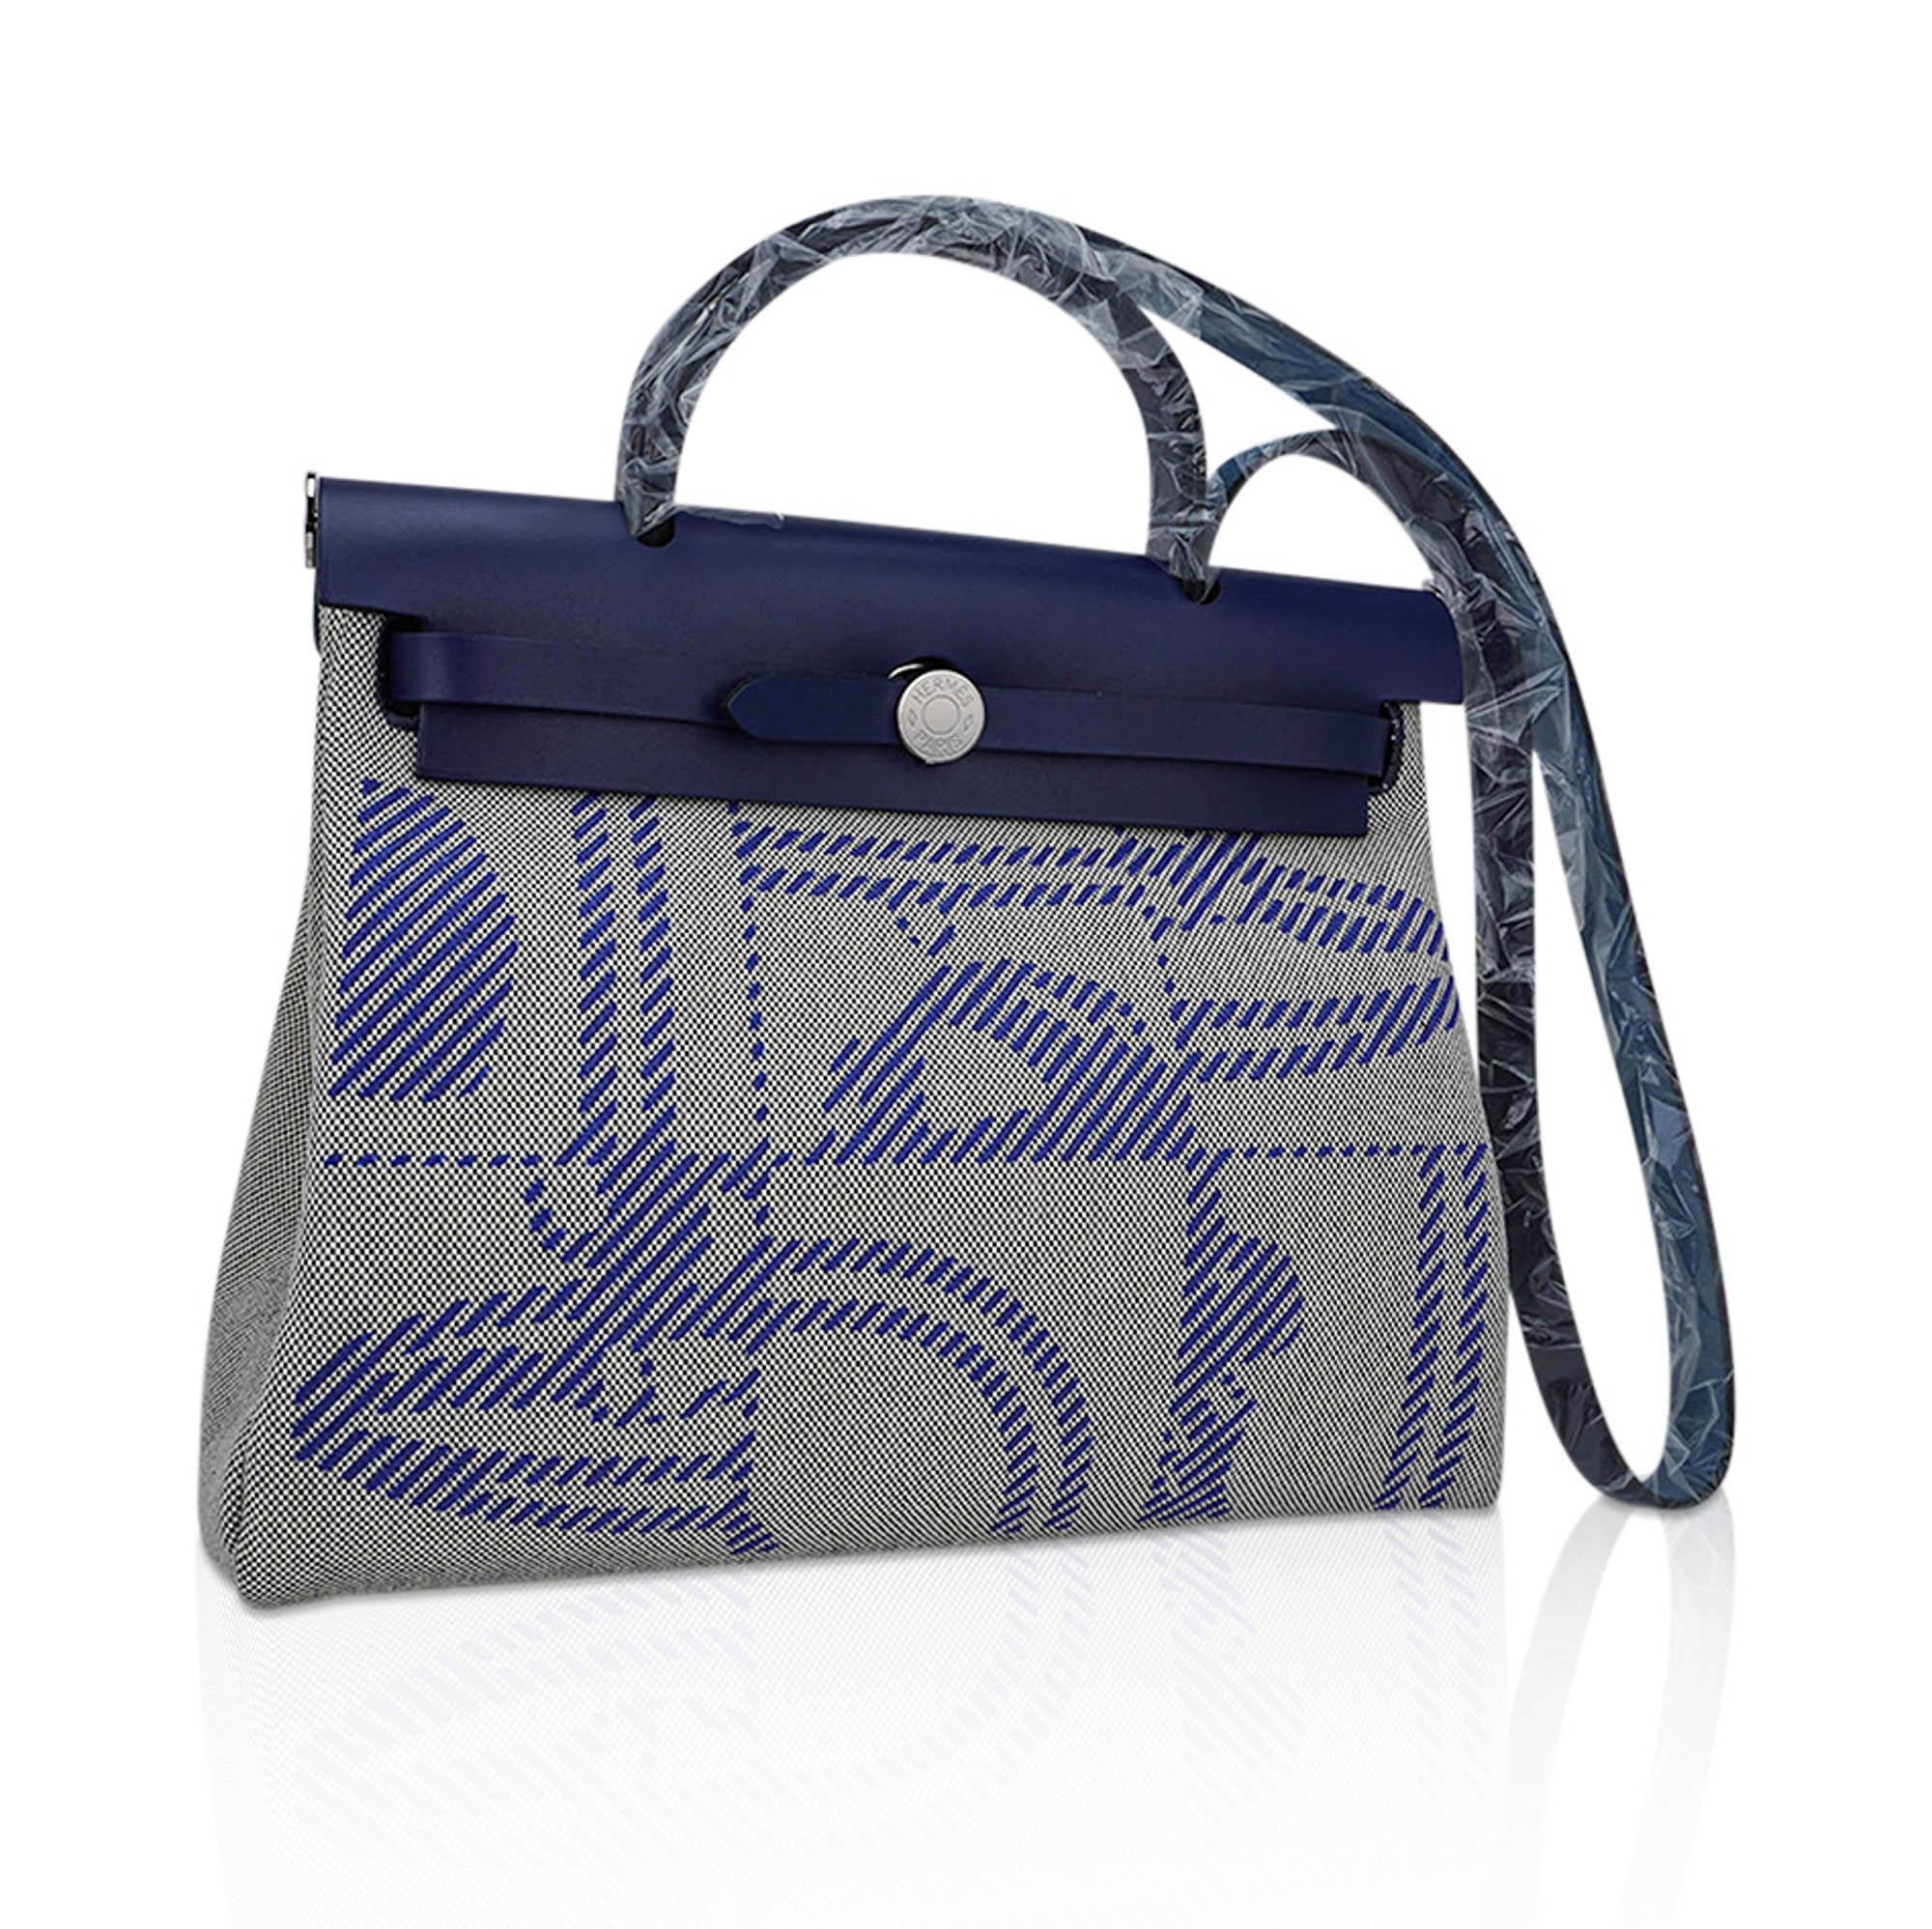 Mightychic offers an Hermes Herbag Zip Retourne 31 featured in Bleu Saphir Vache Hunter leather.
Toile H Brides de Gala en Desodre in Bleu De France, Ecru and Black colorway.
This pattern is deisgned by Hugo Grygkar and Cyrille Diatkine.
The bag has